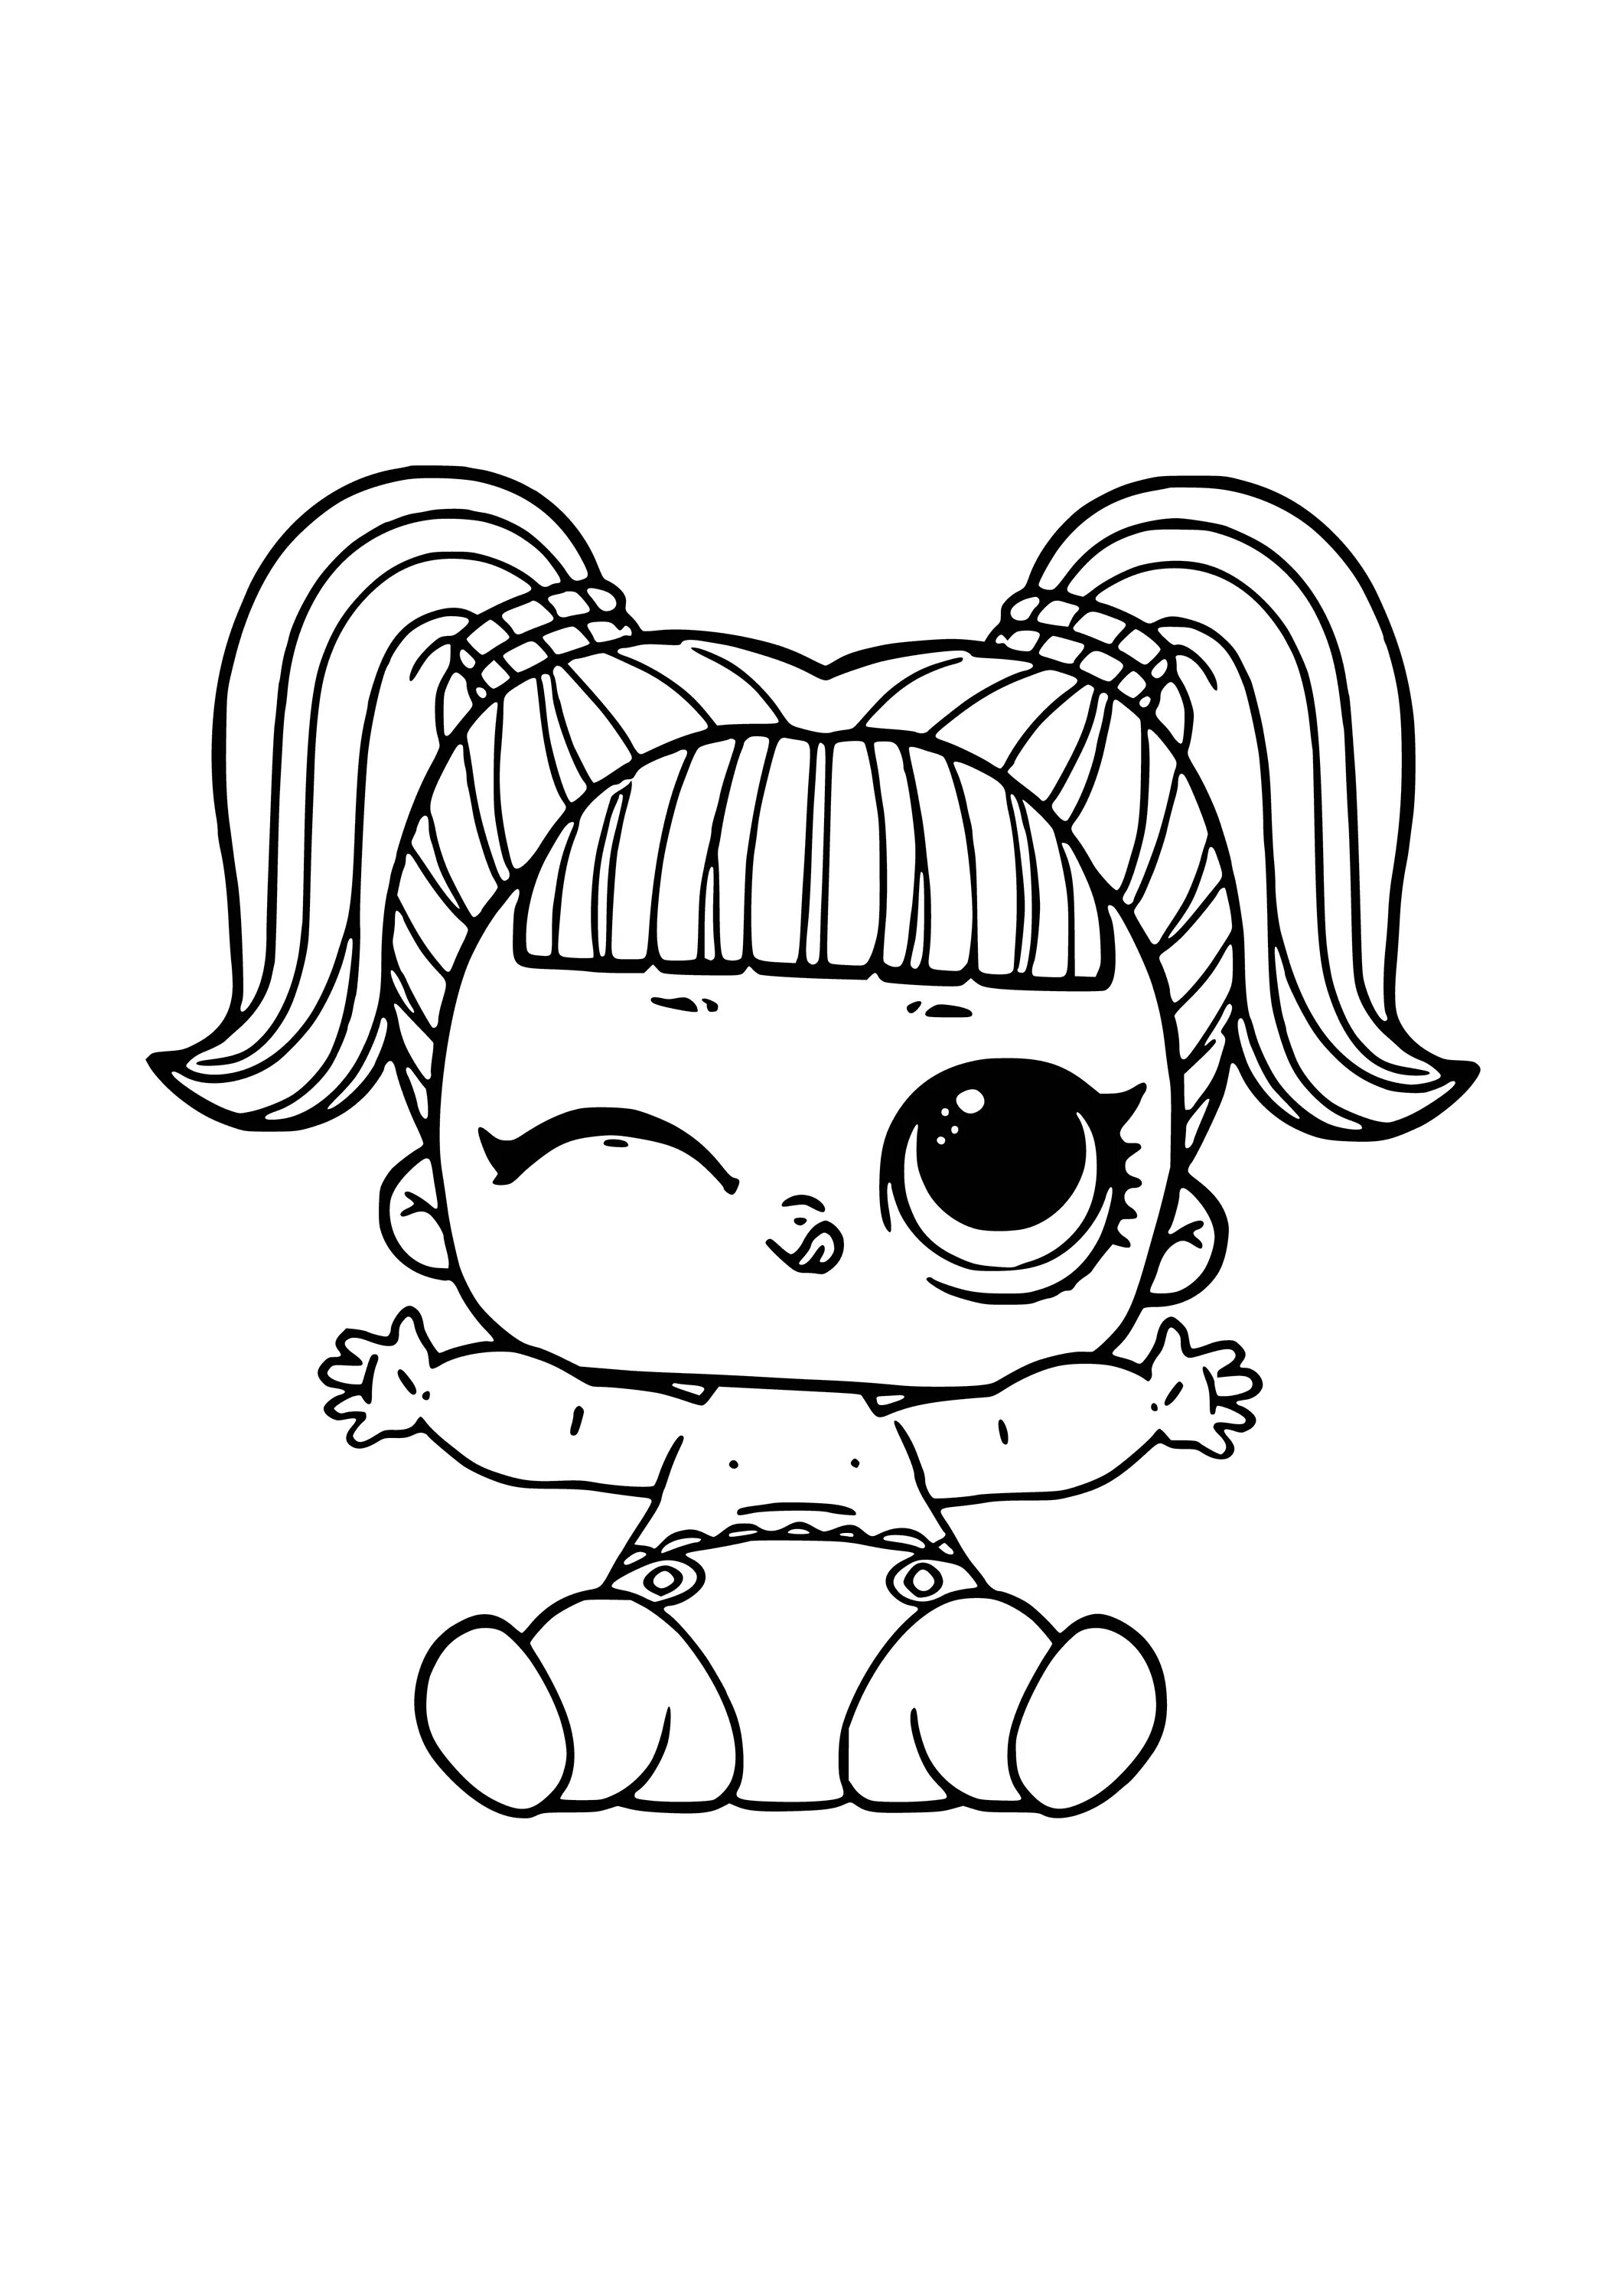 Incredible coloring pages baby dolls lol